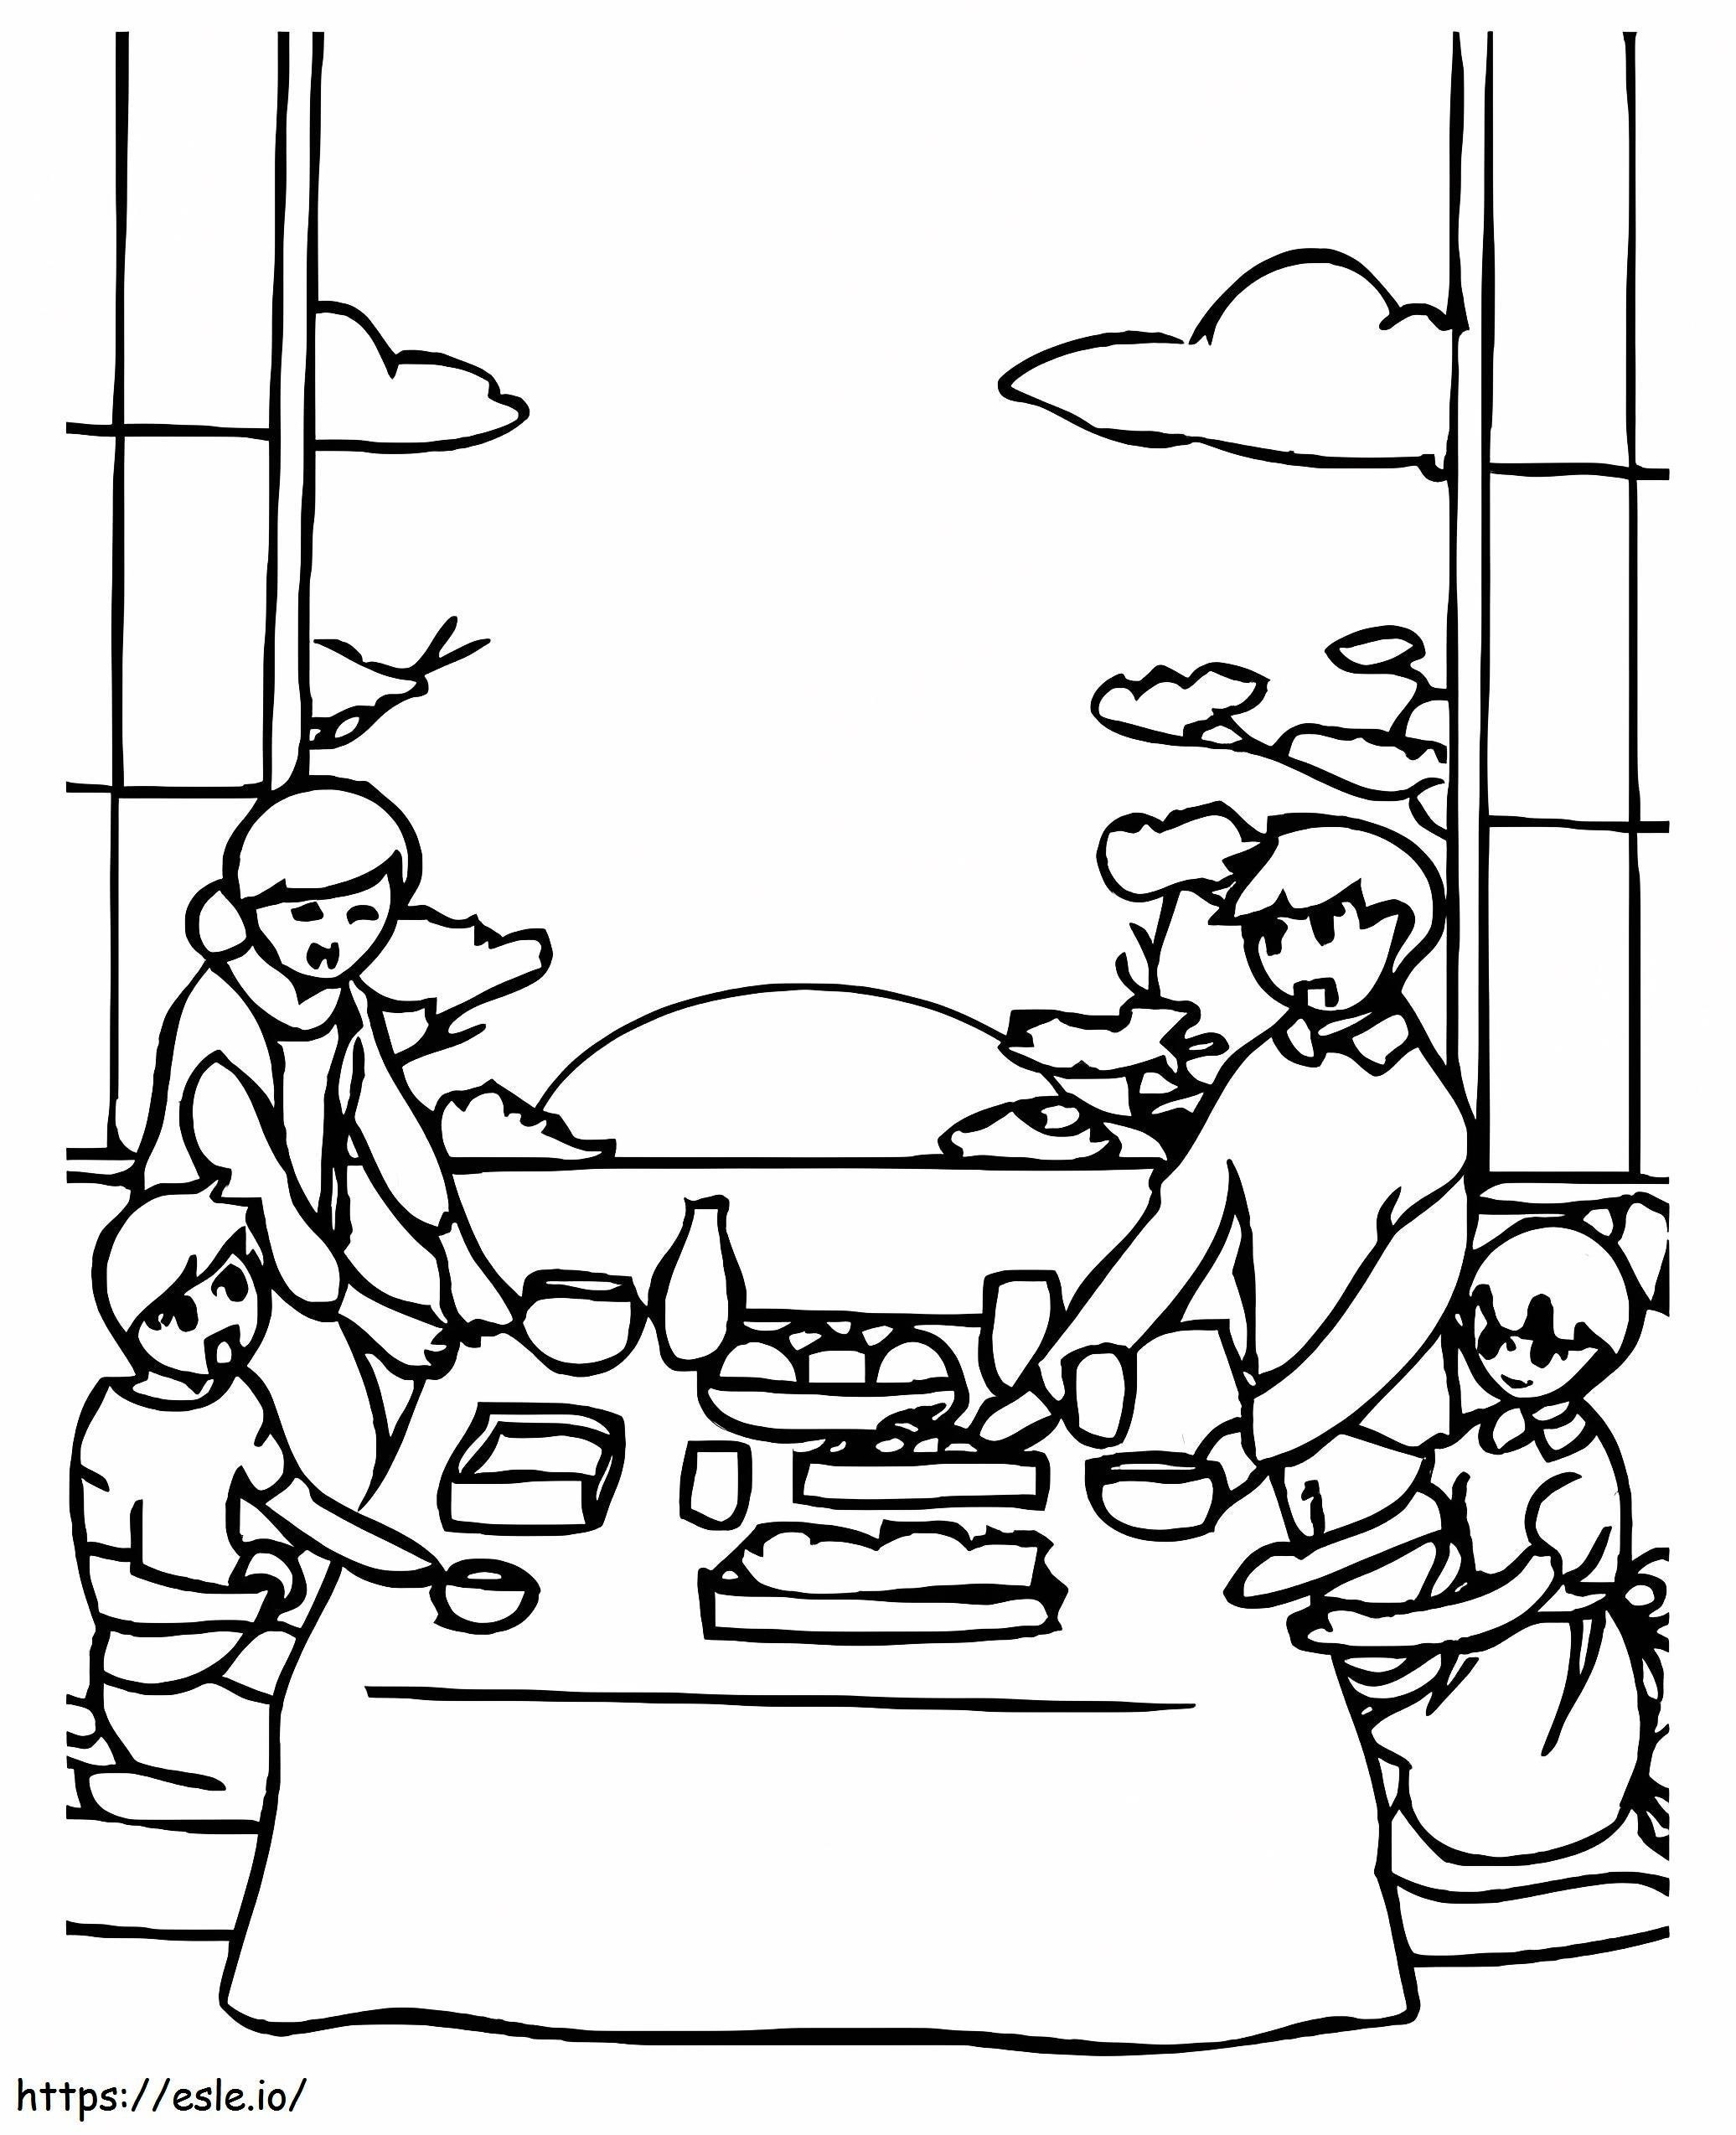 South Korea New Year coloring page